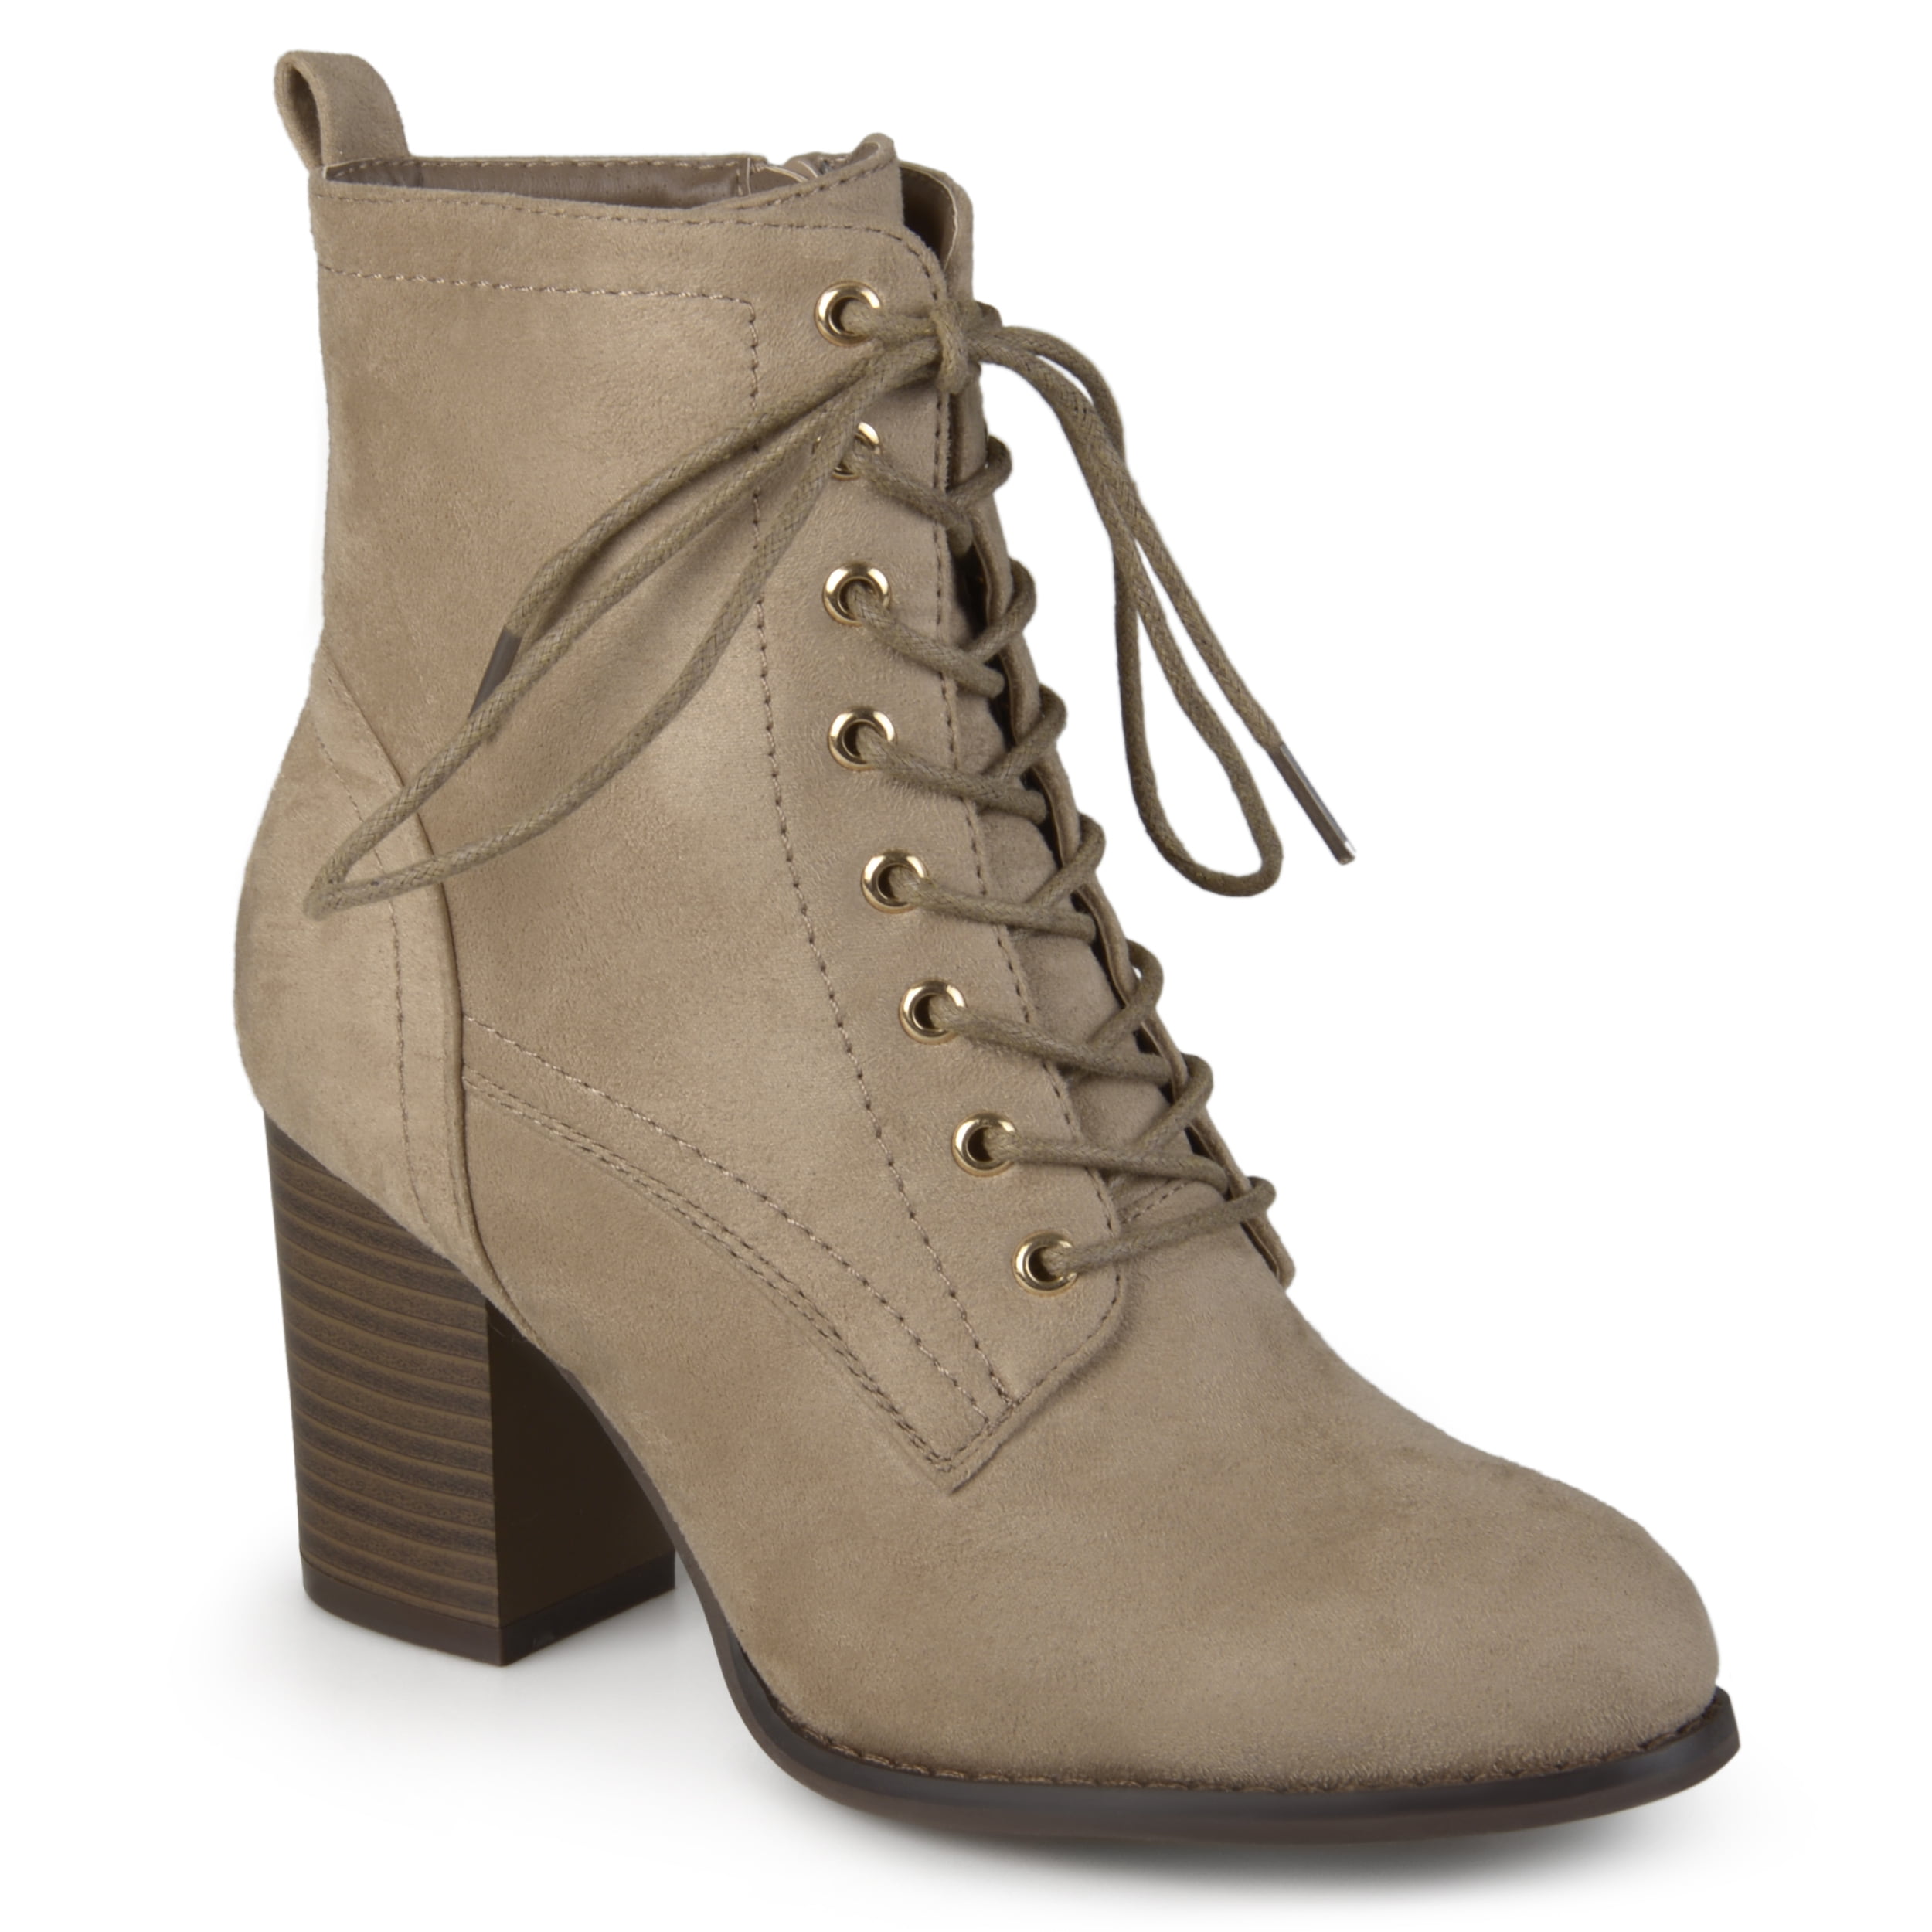 Brinley Co. Women's Lace-Up Faux Suede Booties with Stacked Heel ...